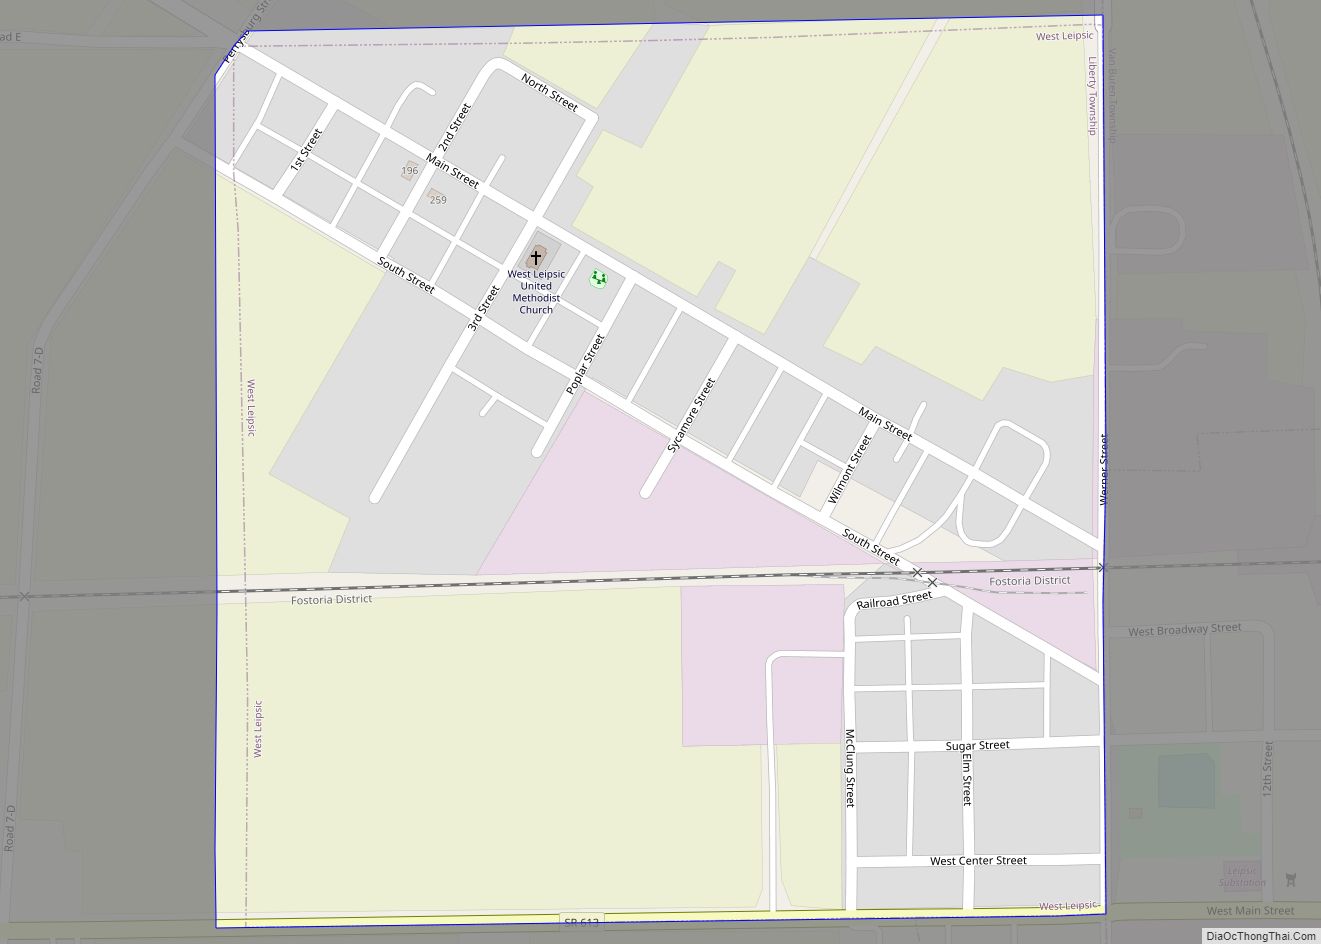 Map of West Leipsic village